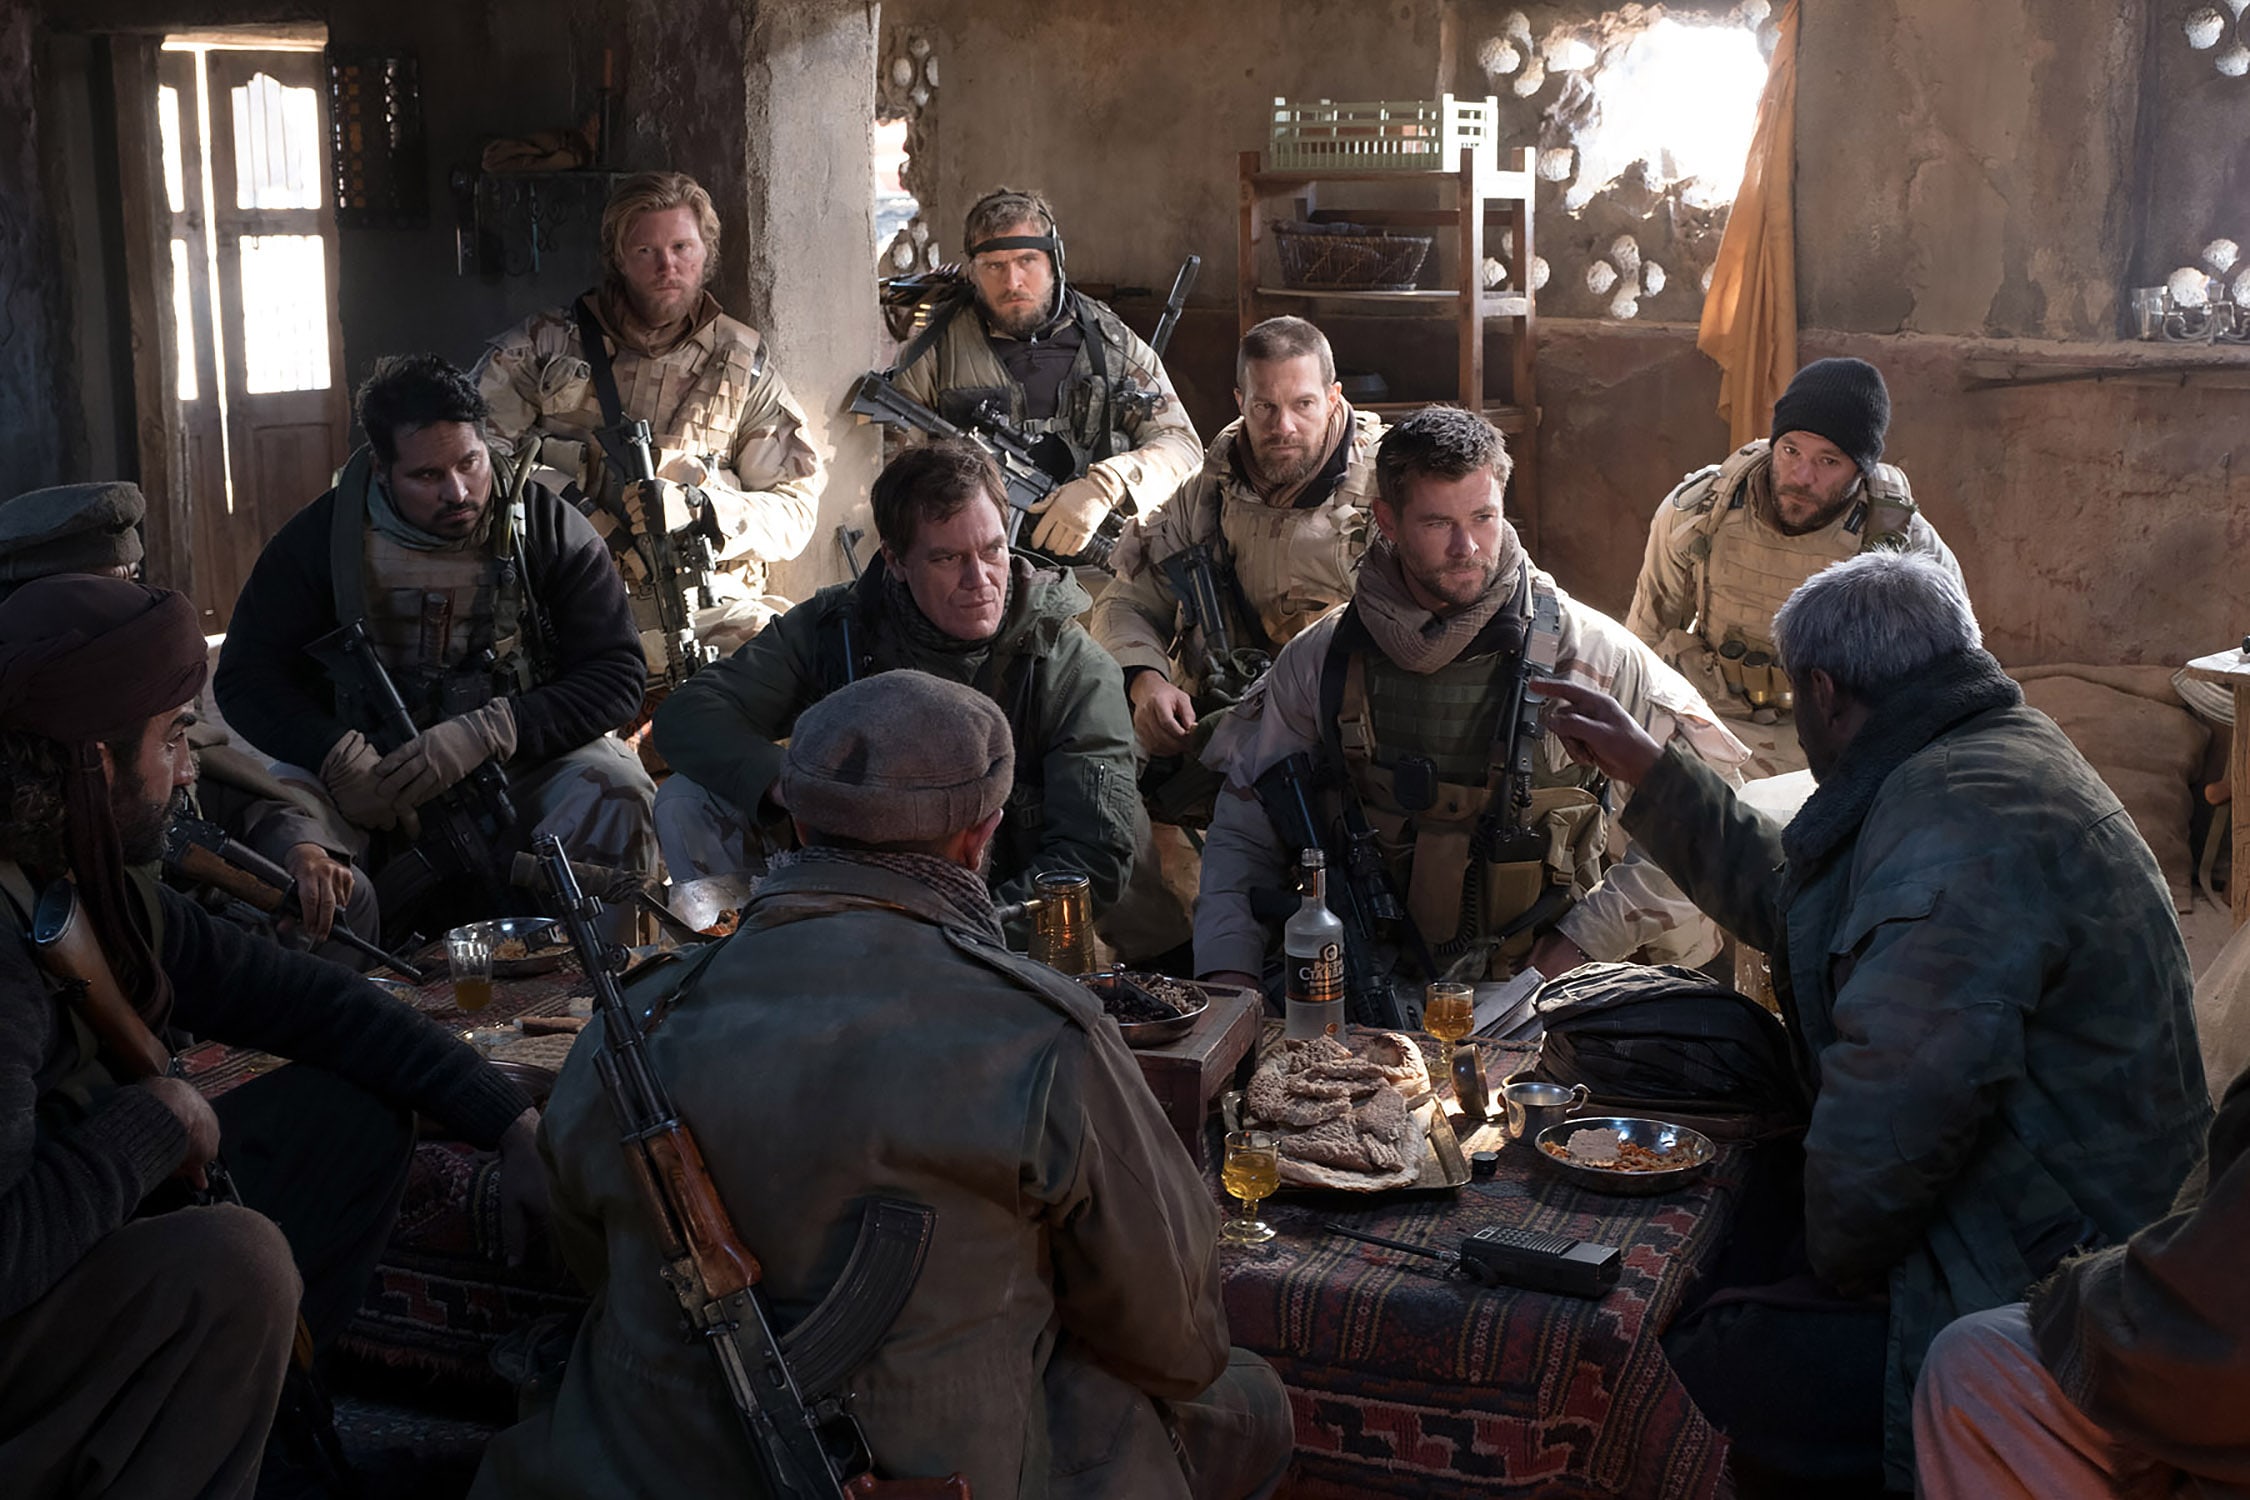 (L-r) MICHAEL PEÑA as Sam Diller, THAD LUCKINBILL as Vern Michaels, MICHAEL SHANNON as Cal Spencer, JACK KESY as Charles Jones, GEOFF STULTS as Sean Coffers, CHRIS HEMSWORTH as Captain Nelson and AUSTIN HÉBERT as Pat Essex in Jerry Bruckheimer Films’, Black Label Media’ and Alcon Entertainment’s war drama “12 STRONG,” a Warner Bros. Pictures release. Photo by David James